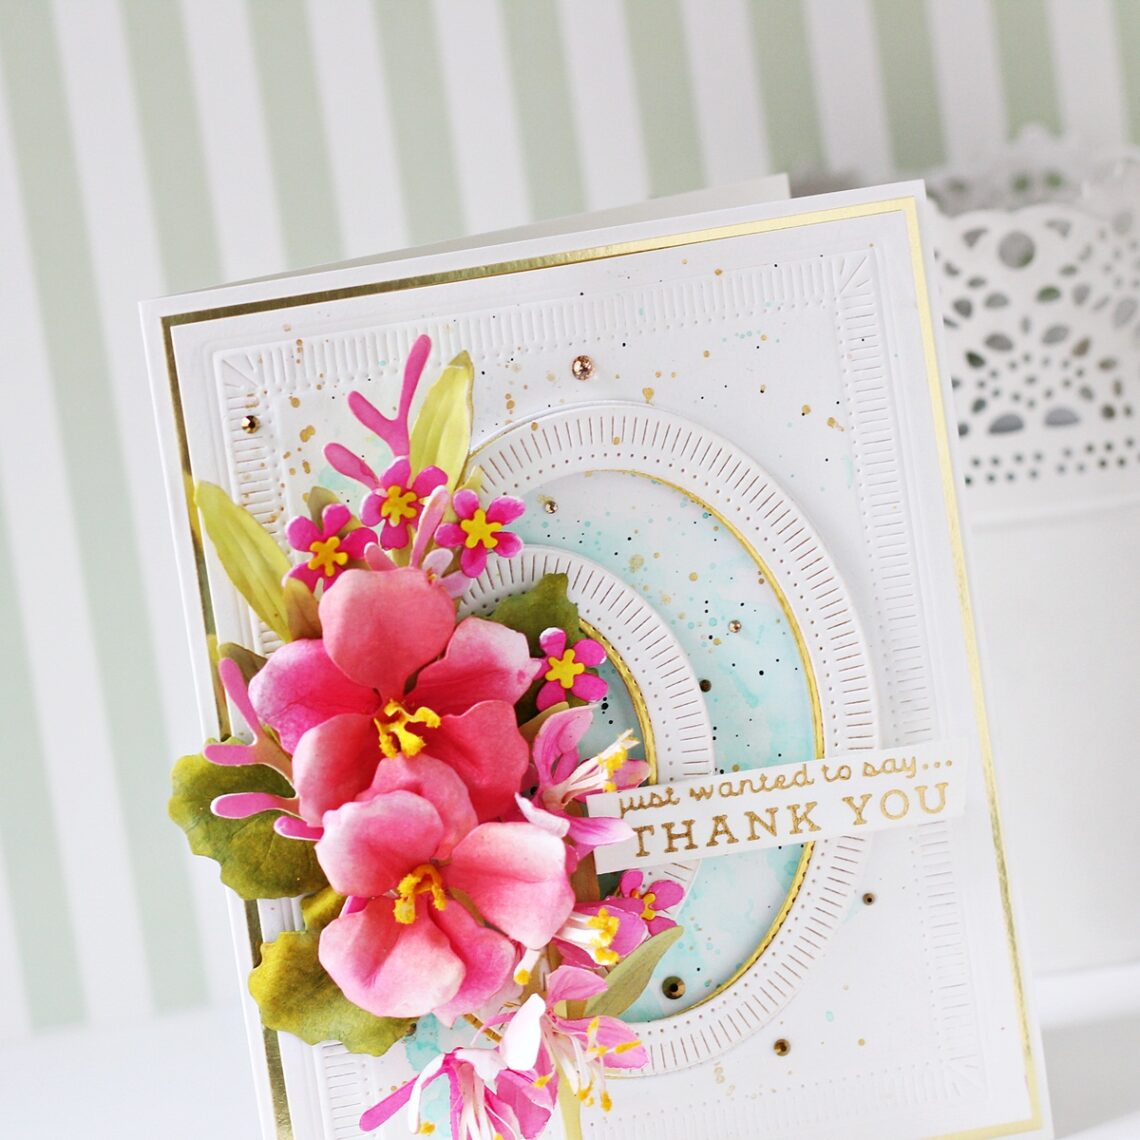 Layered Floral Handmade Cards featuring Susan's Through The Garden Gate ...